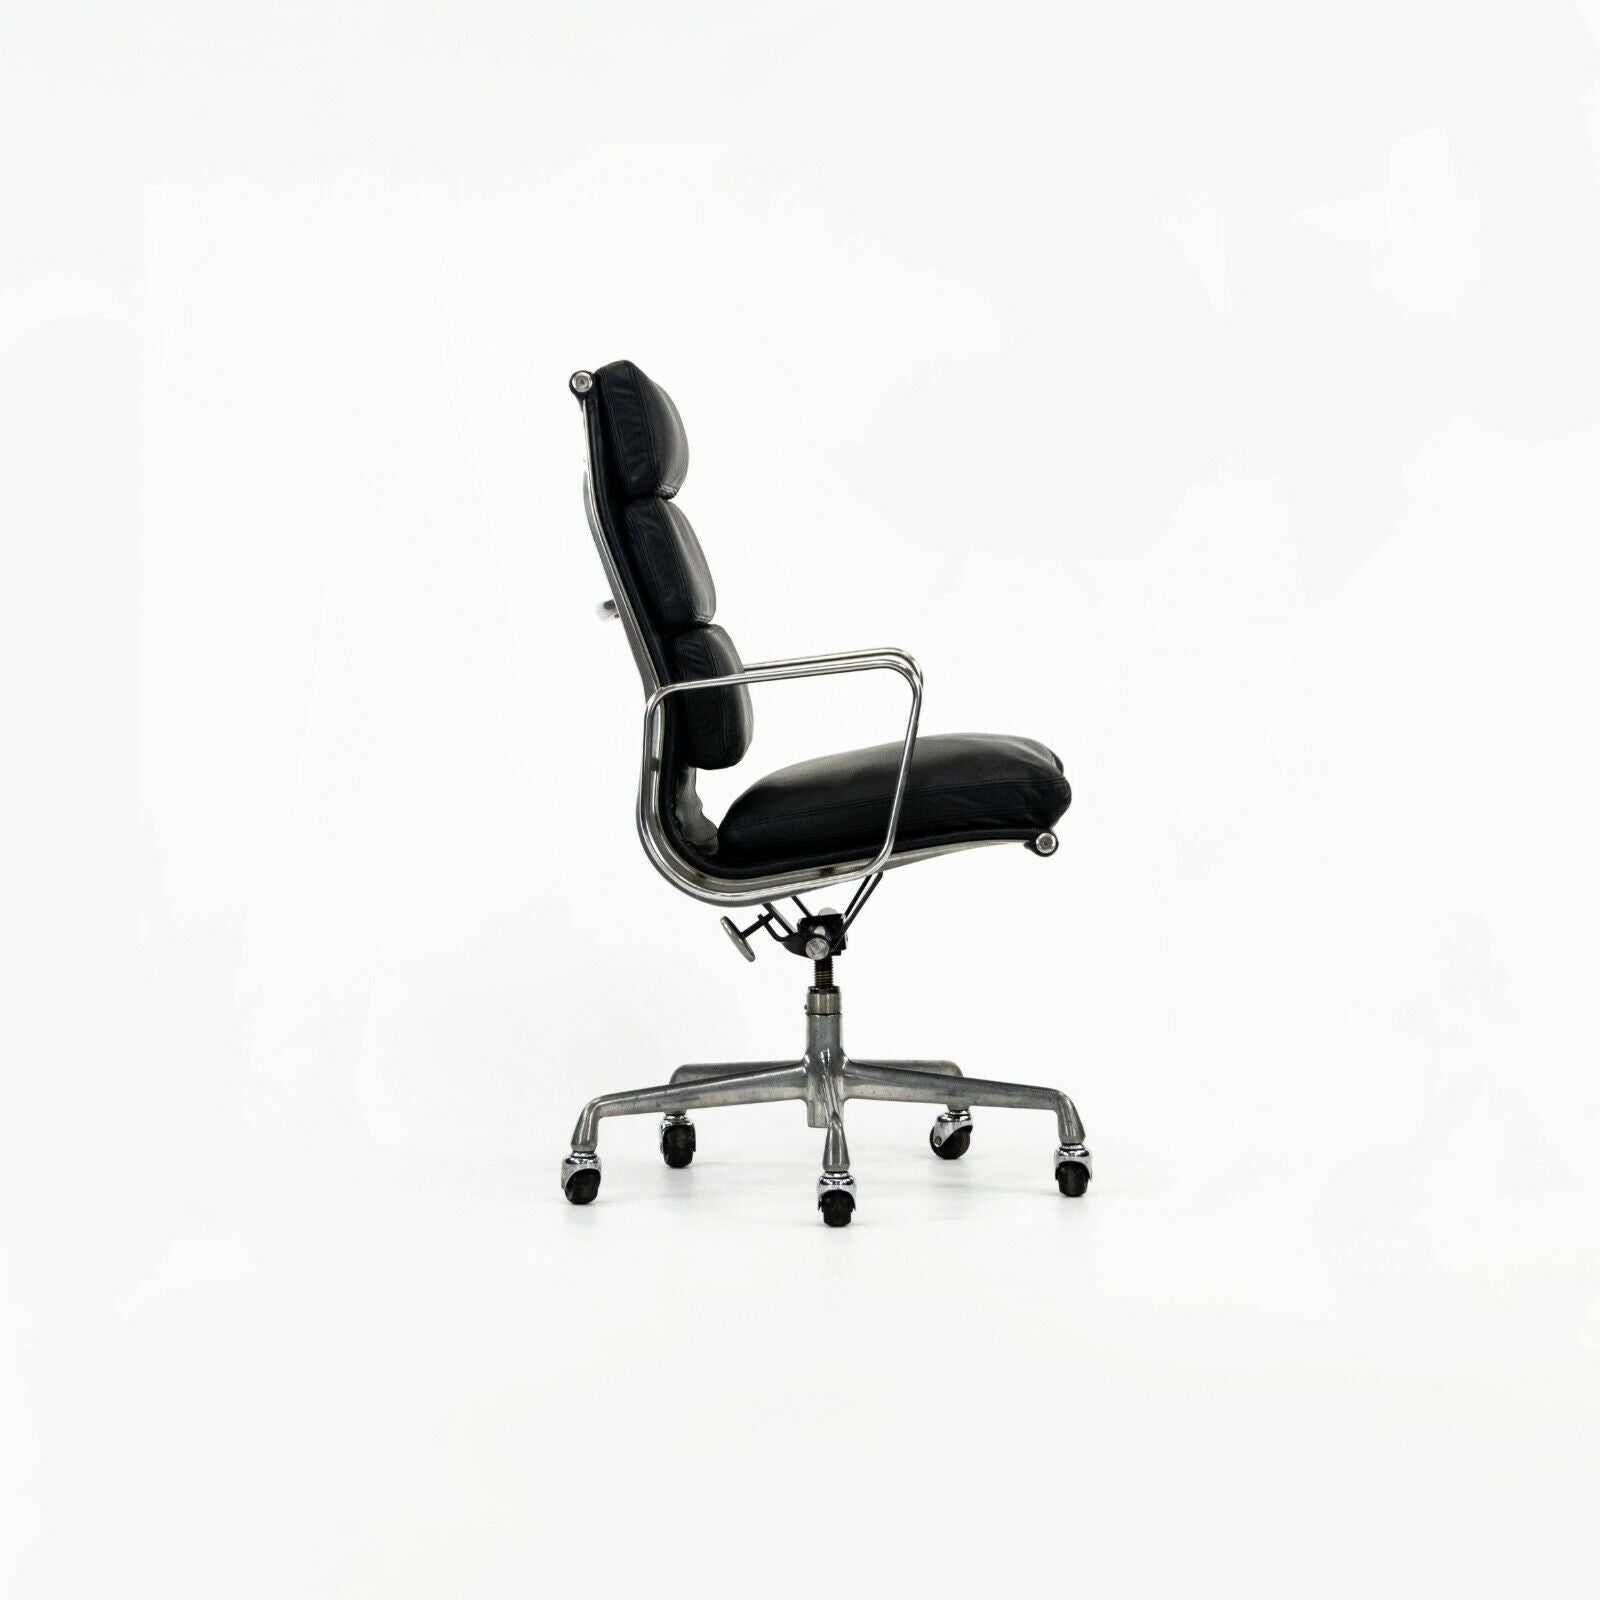 SOLD 1990s Herman Miller Eames Aluminum Group Soft Pad Executive Desk Chair in Navy Blue